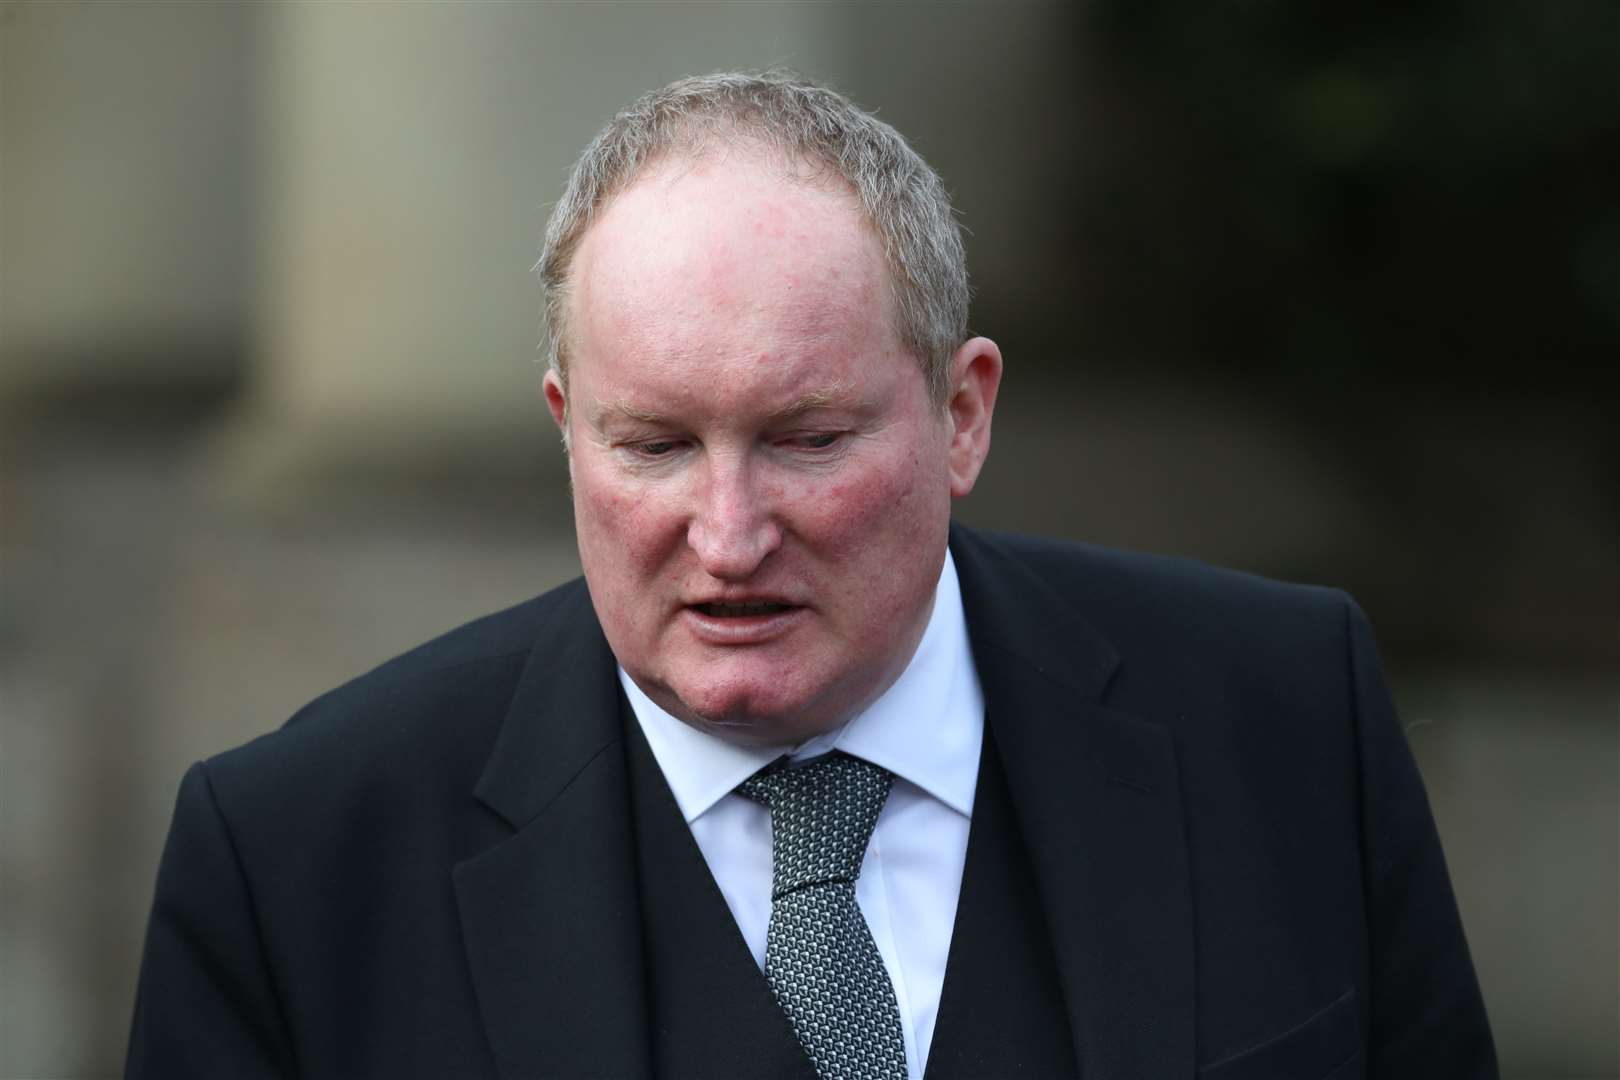 Prosecutor Iain McSporran QC outside the High Court in Glasgow during the trial (Andrew Milligan/PA)